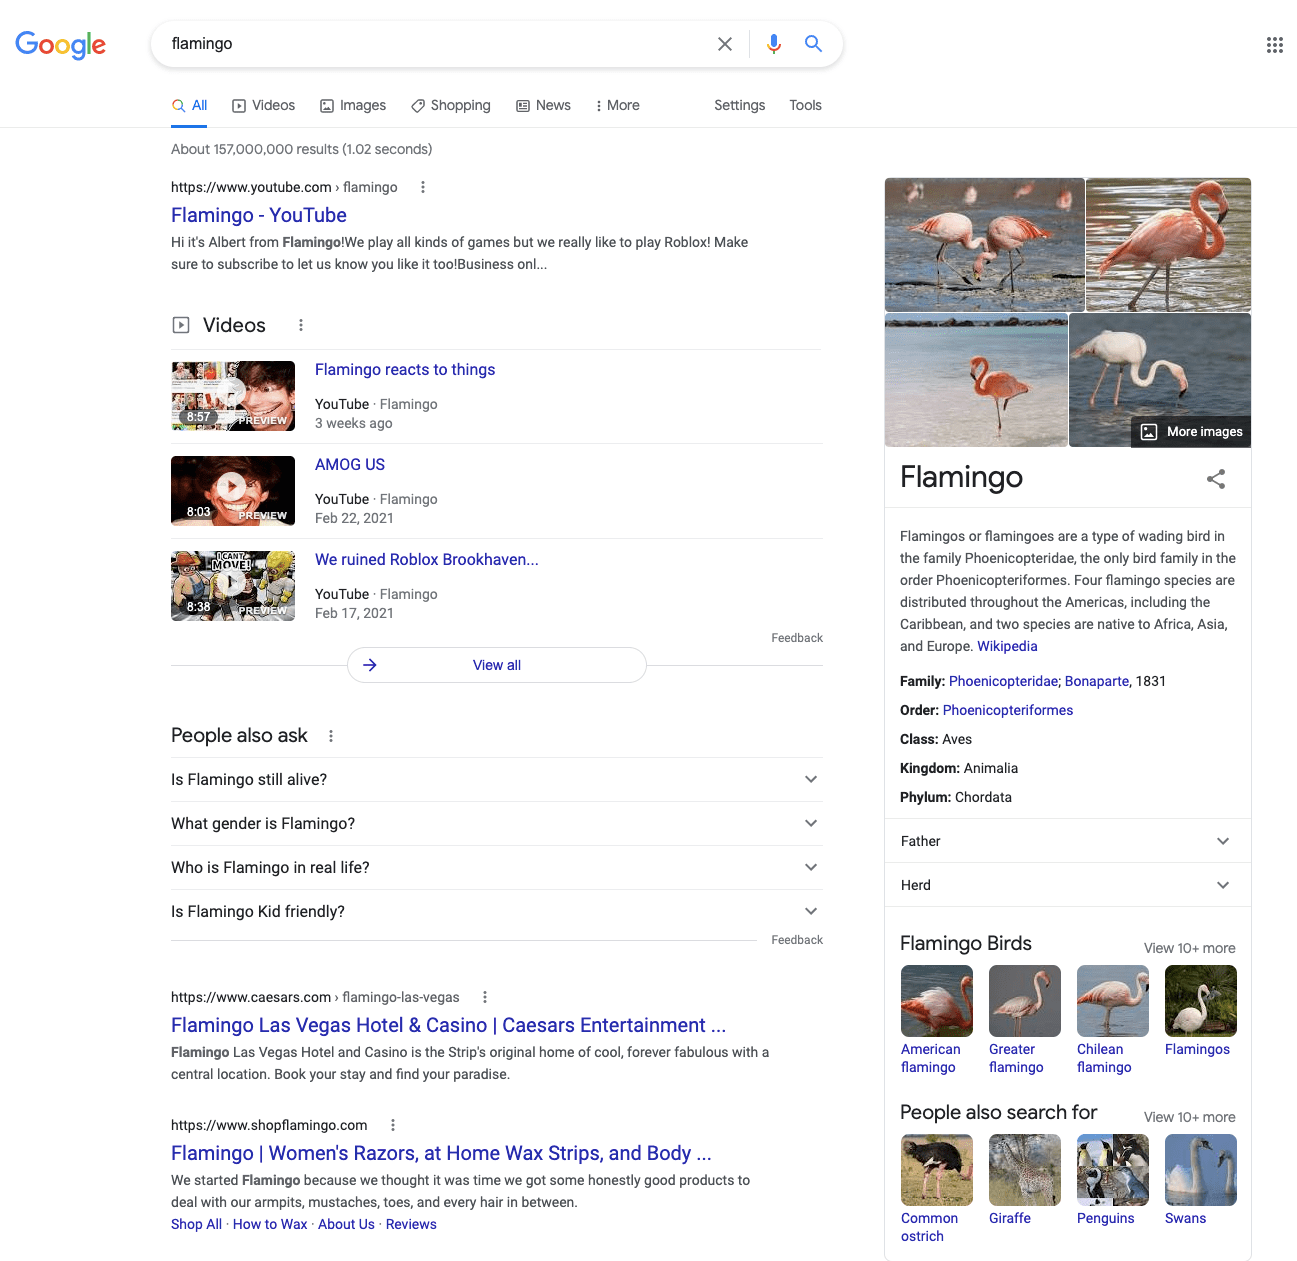 Search results for a general query